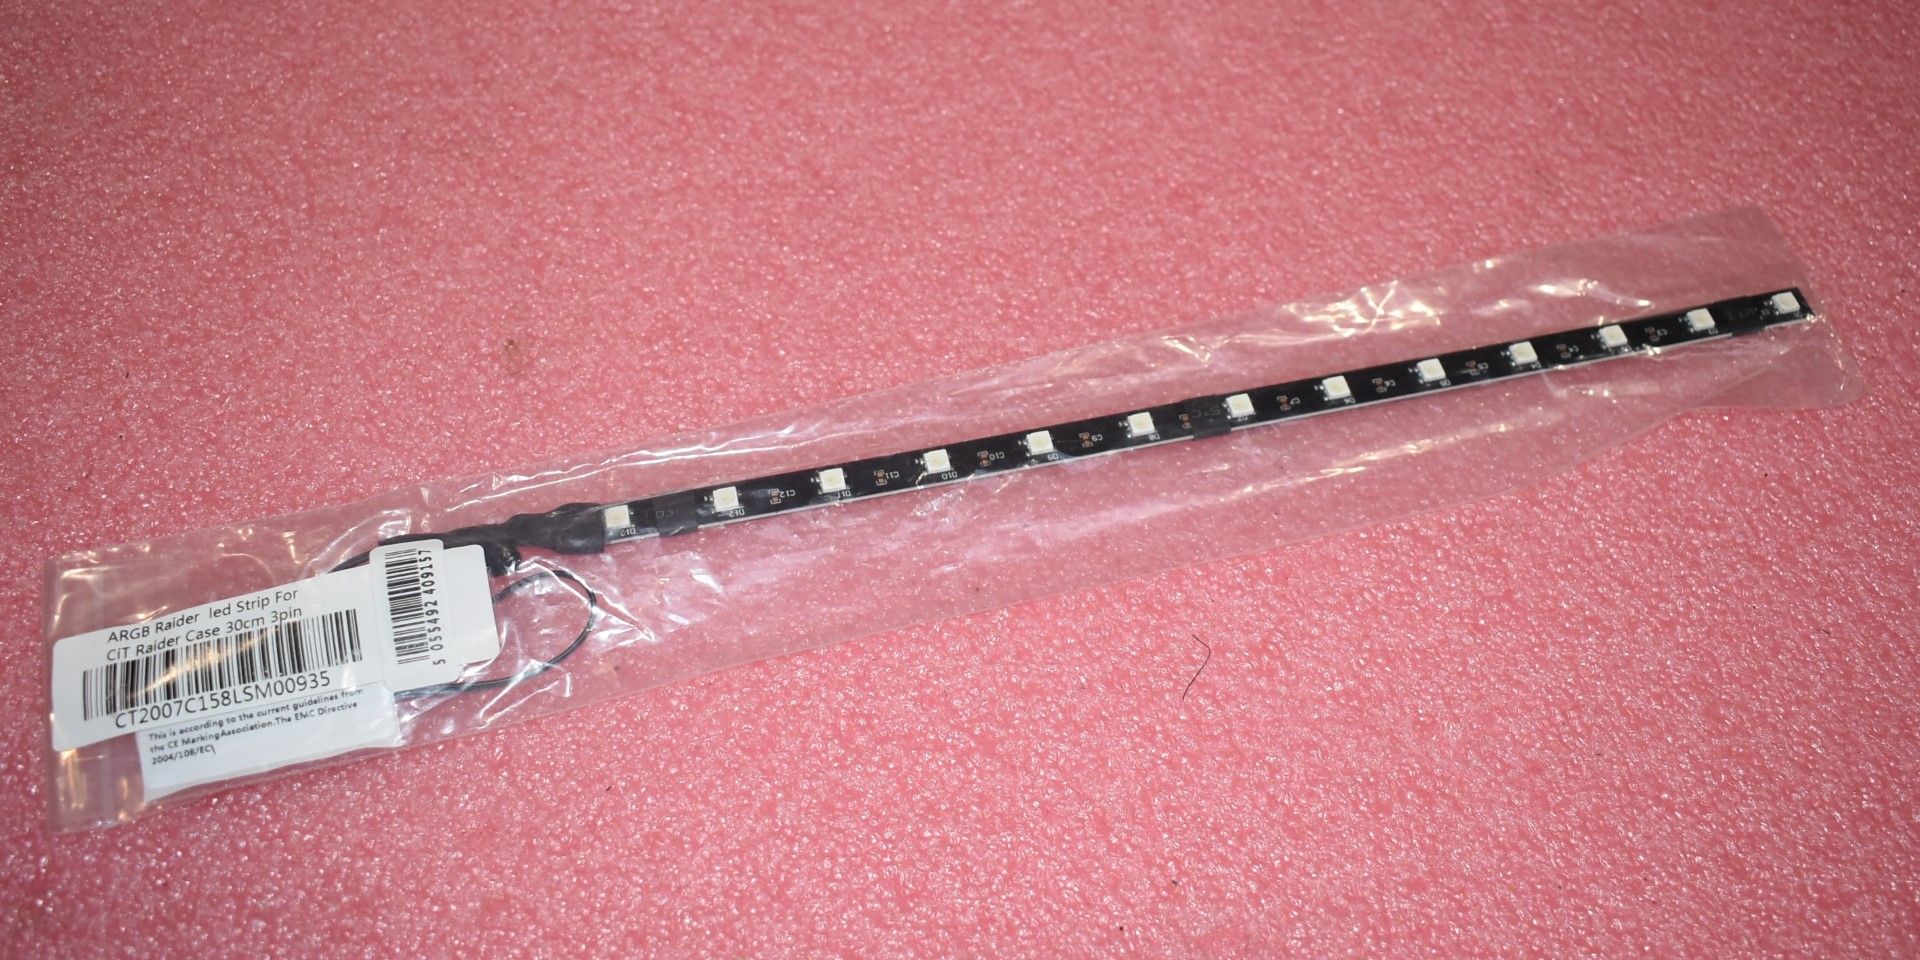 50 x ARGB Raider LED Strips For Computer Cases - 30cm Length With 3 Pin Connectors - Image 3 of 5